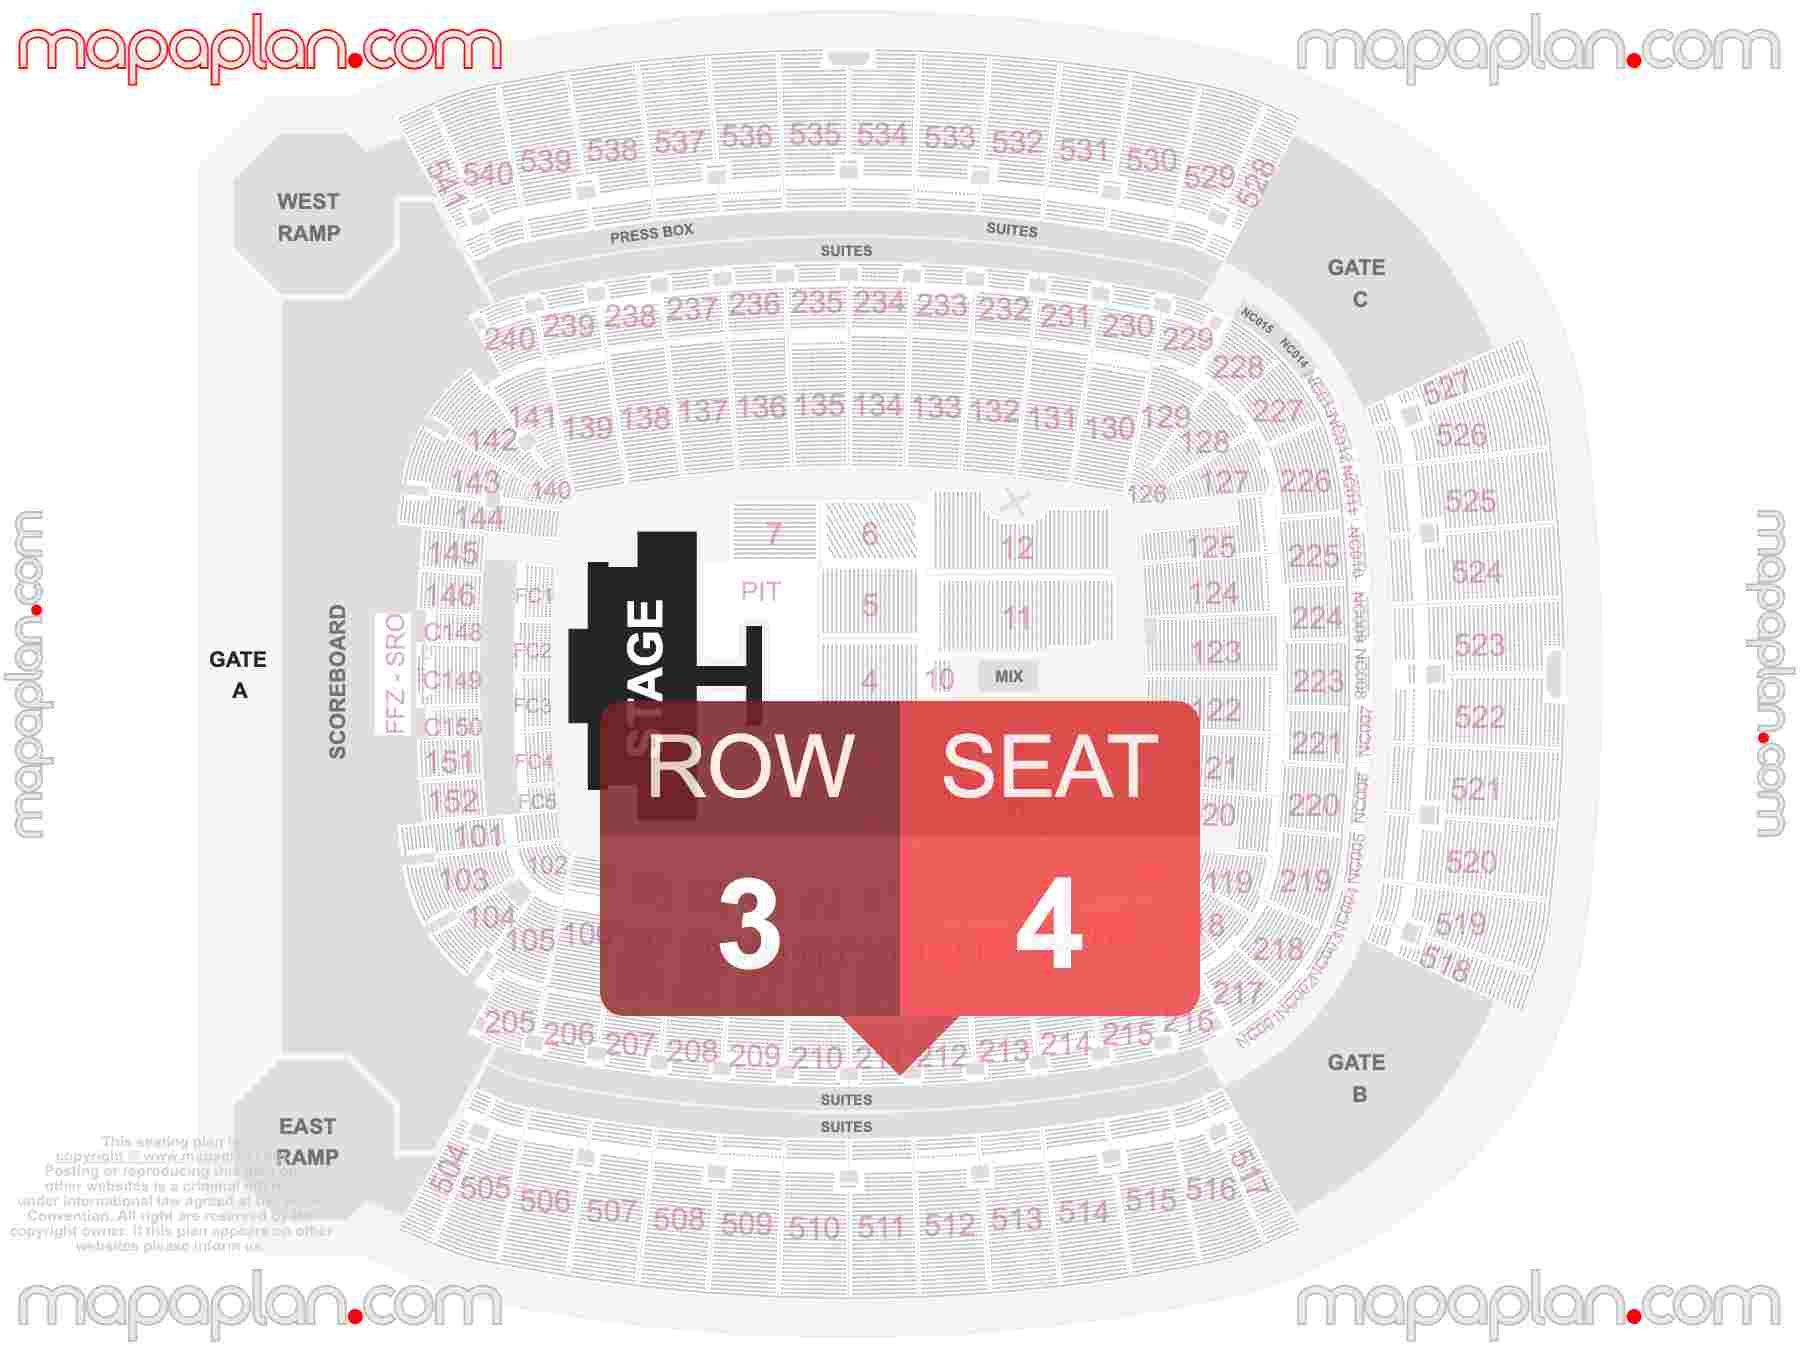 Pittsburgh Acrisure Stadium seating chart Concert detailed seat numbers and row numbering chart with interactive map plan layout